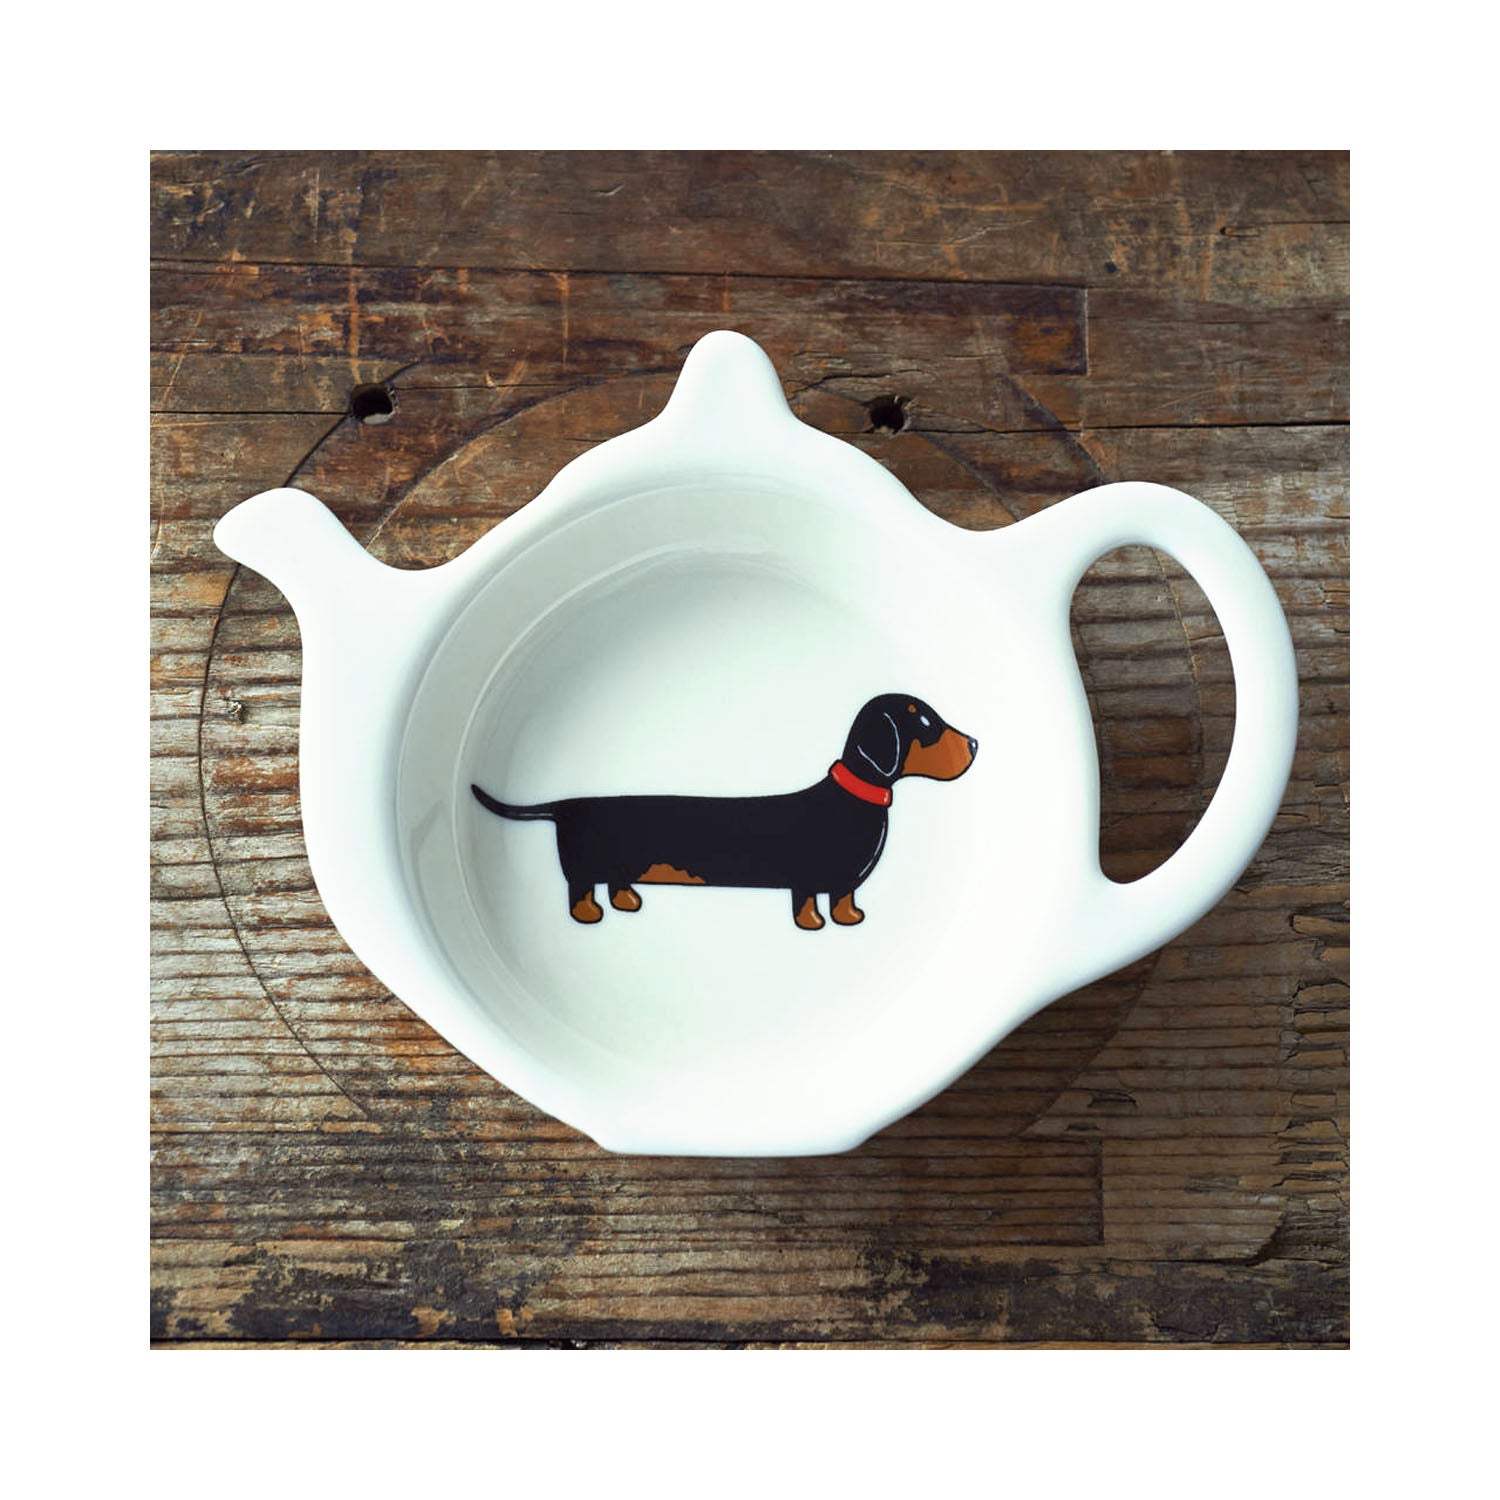 Dog Lover Gifts available at Dog Krazy Gifts - Florence The Dachshund Teabag Dish - part of the Sweet William range available from Dog Krazy Gifts